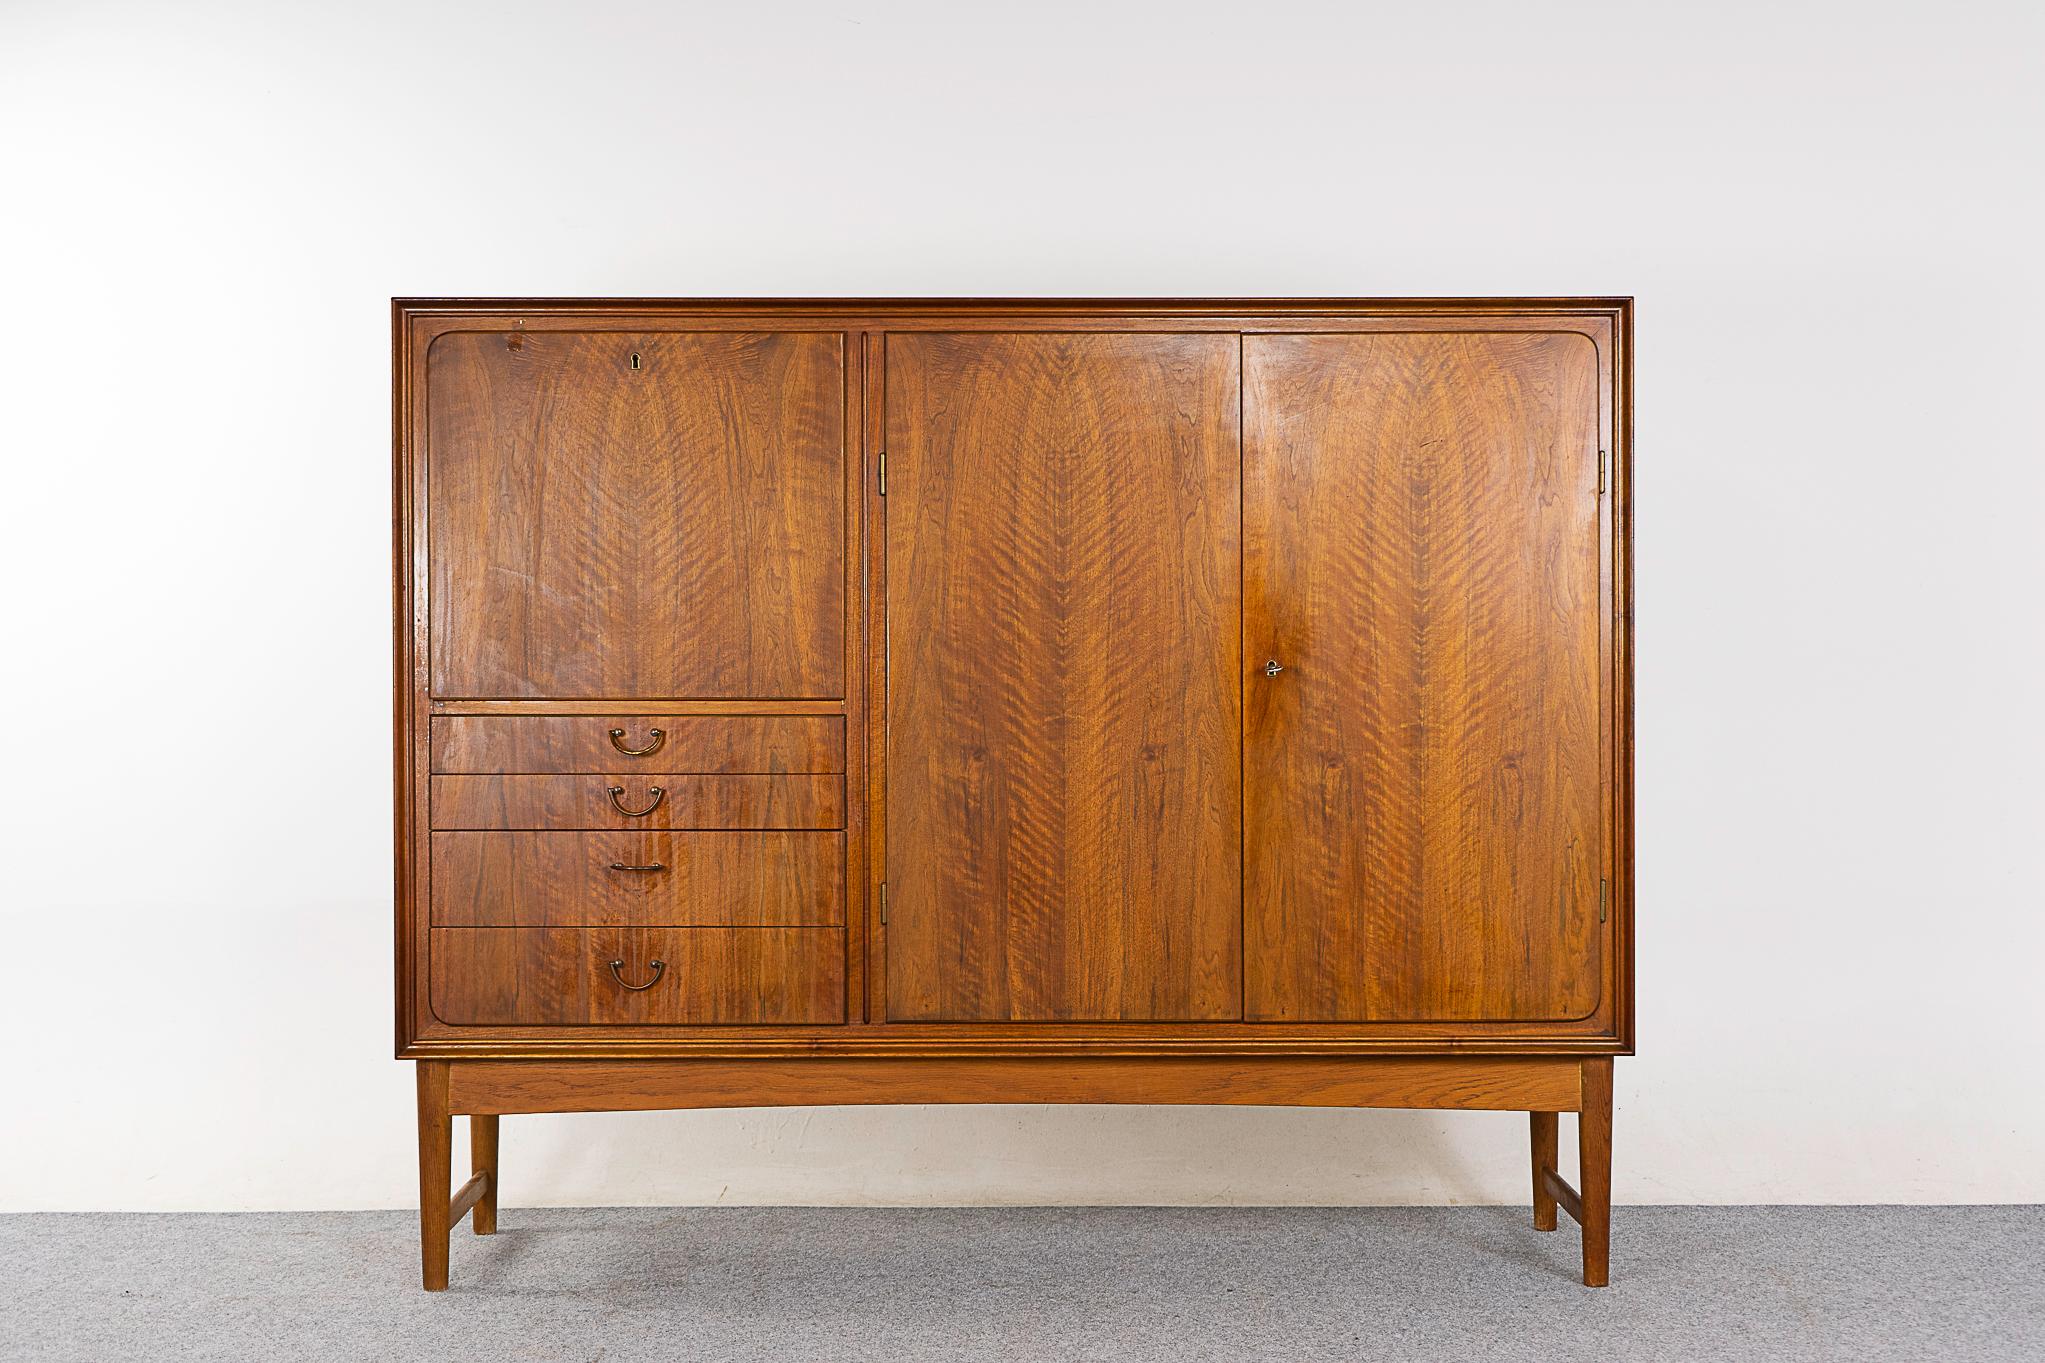 Walnut Danish sideboard, circa 1960's. Stunning simple lined design with exceptional book-matched veneer. Drop down door reveals a charming bar with a curved adjustable shelf for tall bottles. Interior shelving behind the large double doors is